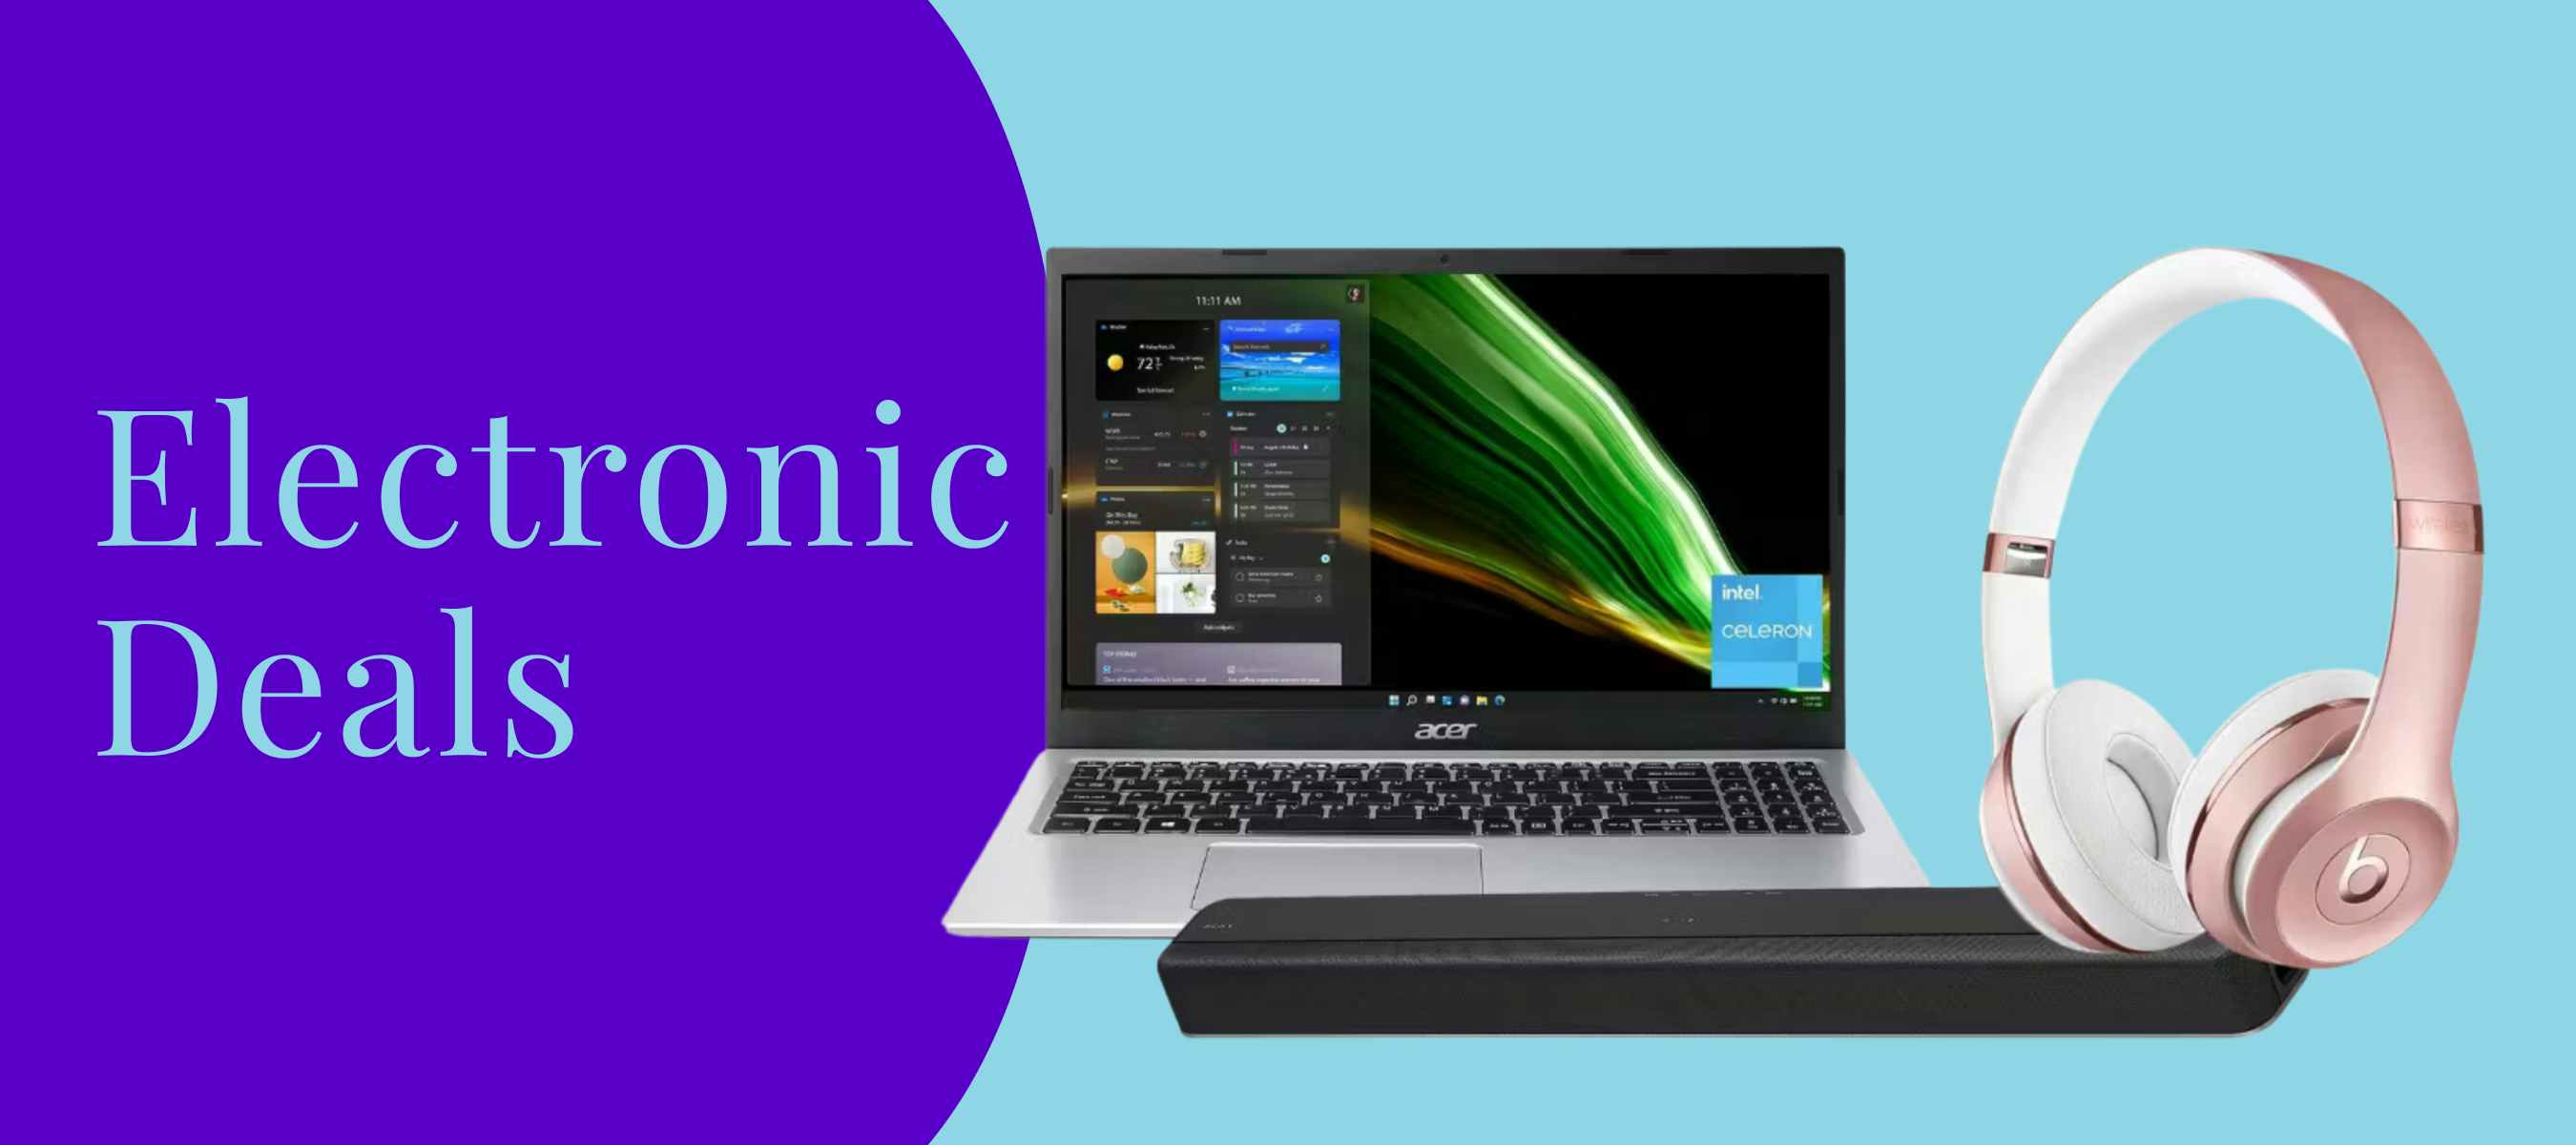 Prime Day lightning deals live – the final deals on laptops, kitchenware  and more